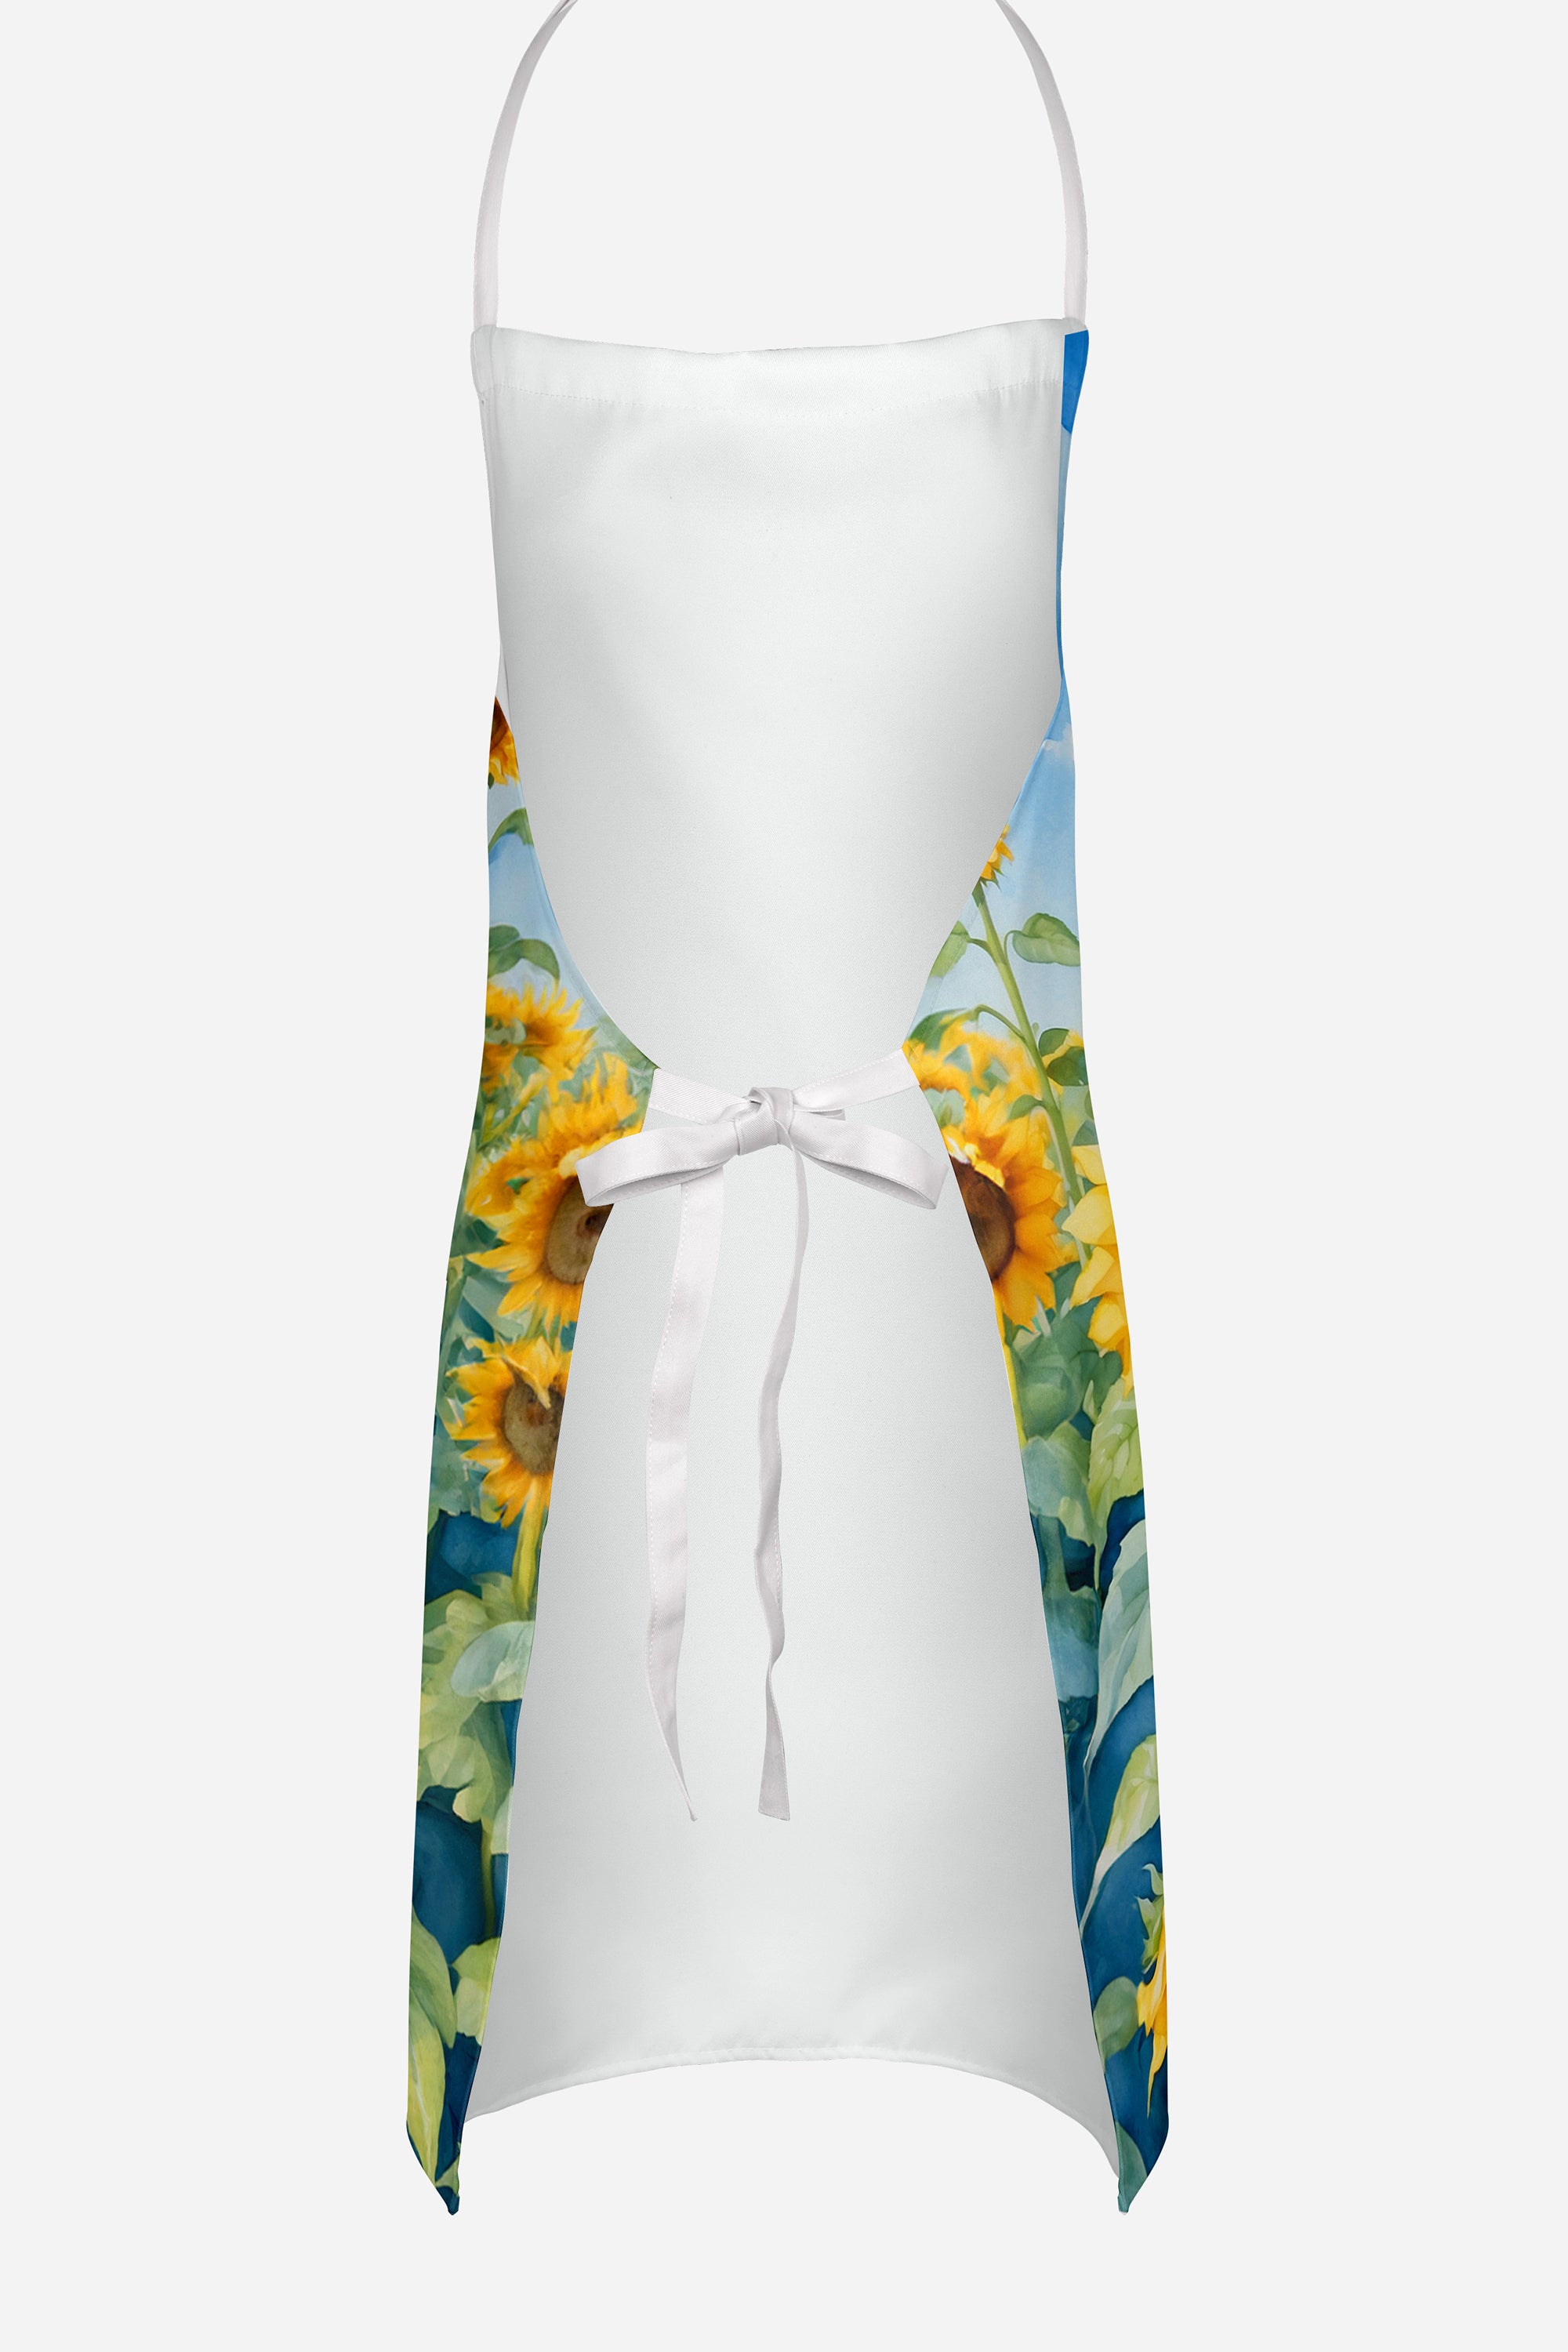 Clumber Spaniel in Sunflowers Apron